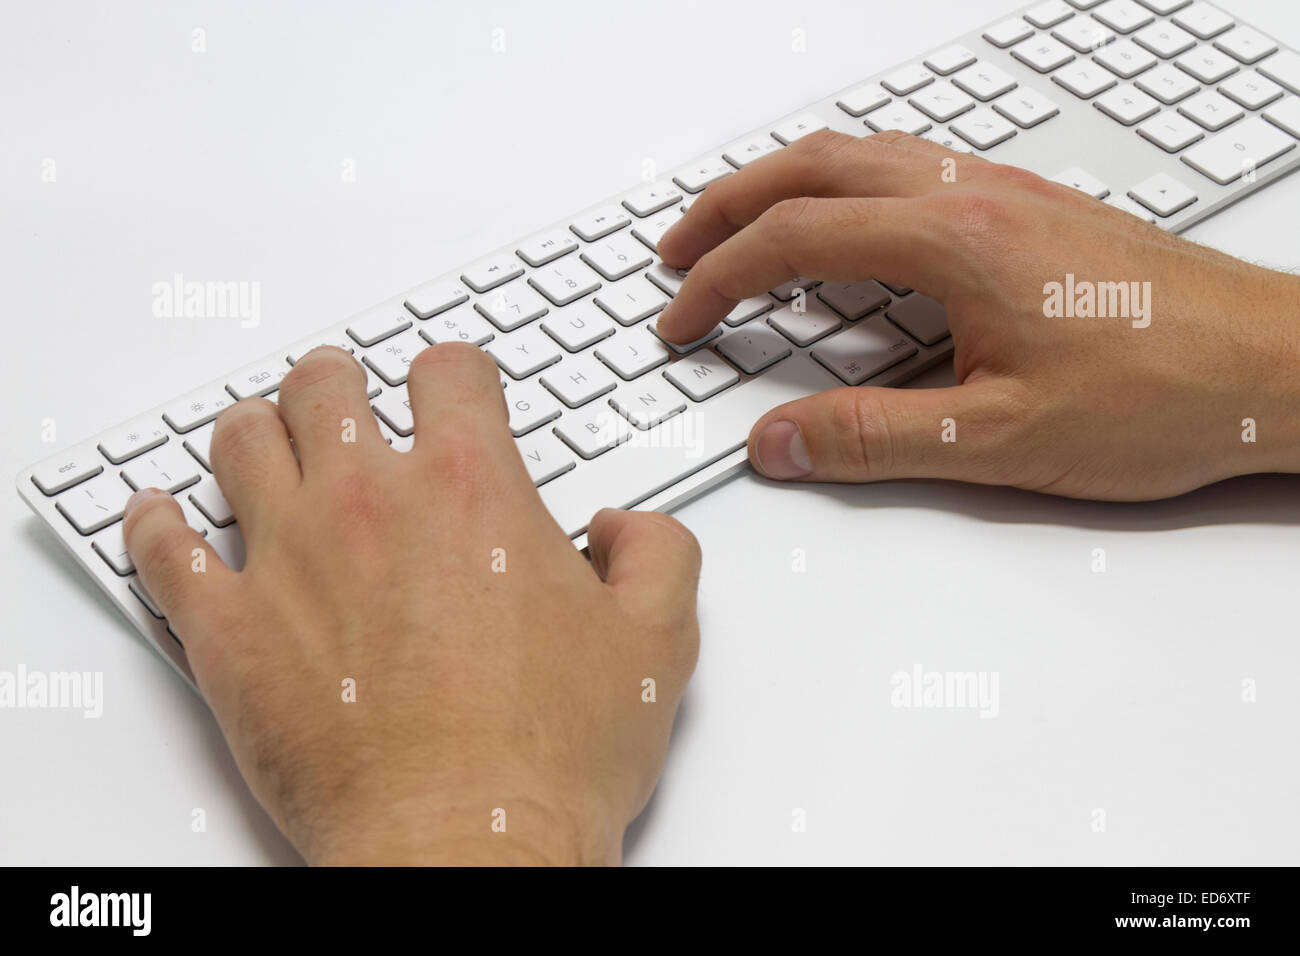 hands typing on the white wireless keyboard Stock Photo